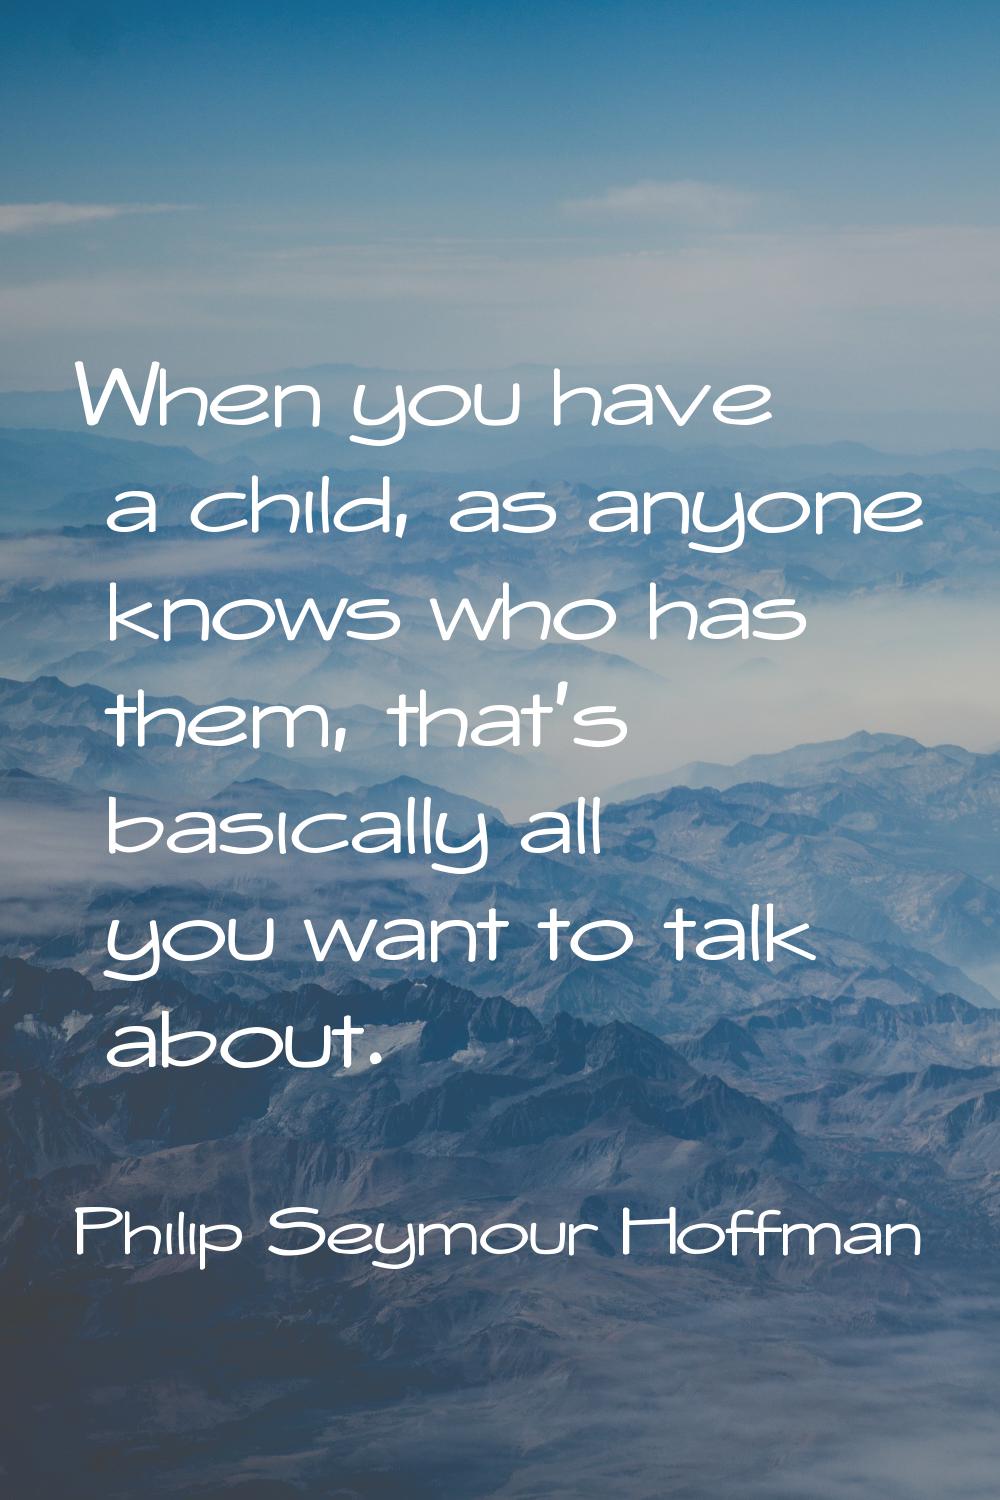 When you have a child, as anyone knows who has them, that's basically all you want to talk about.